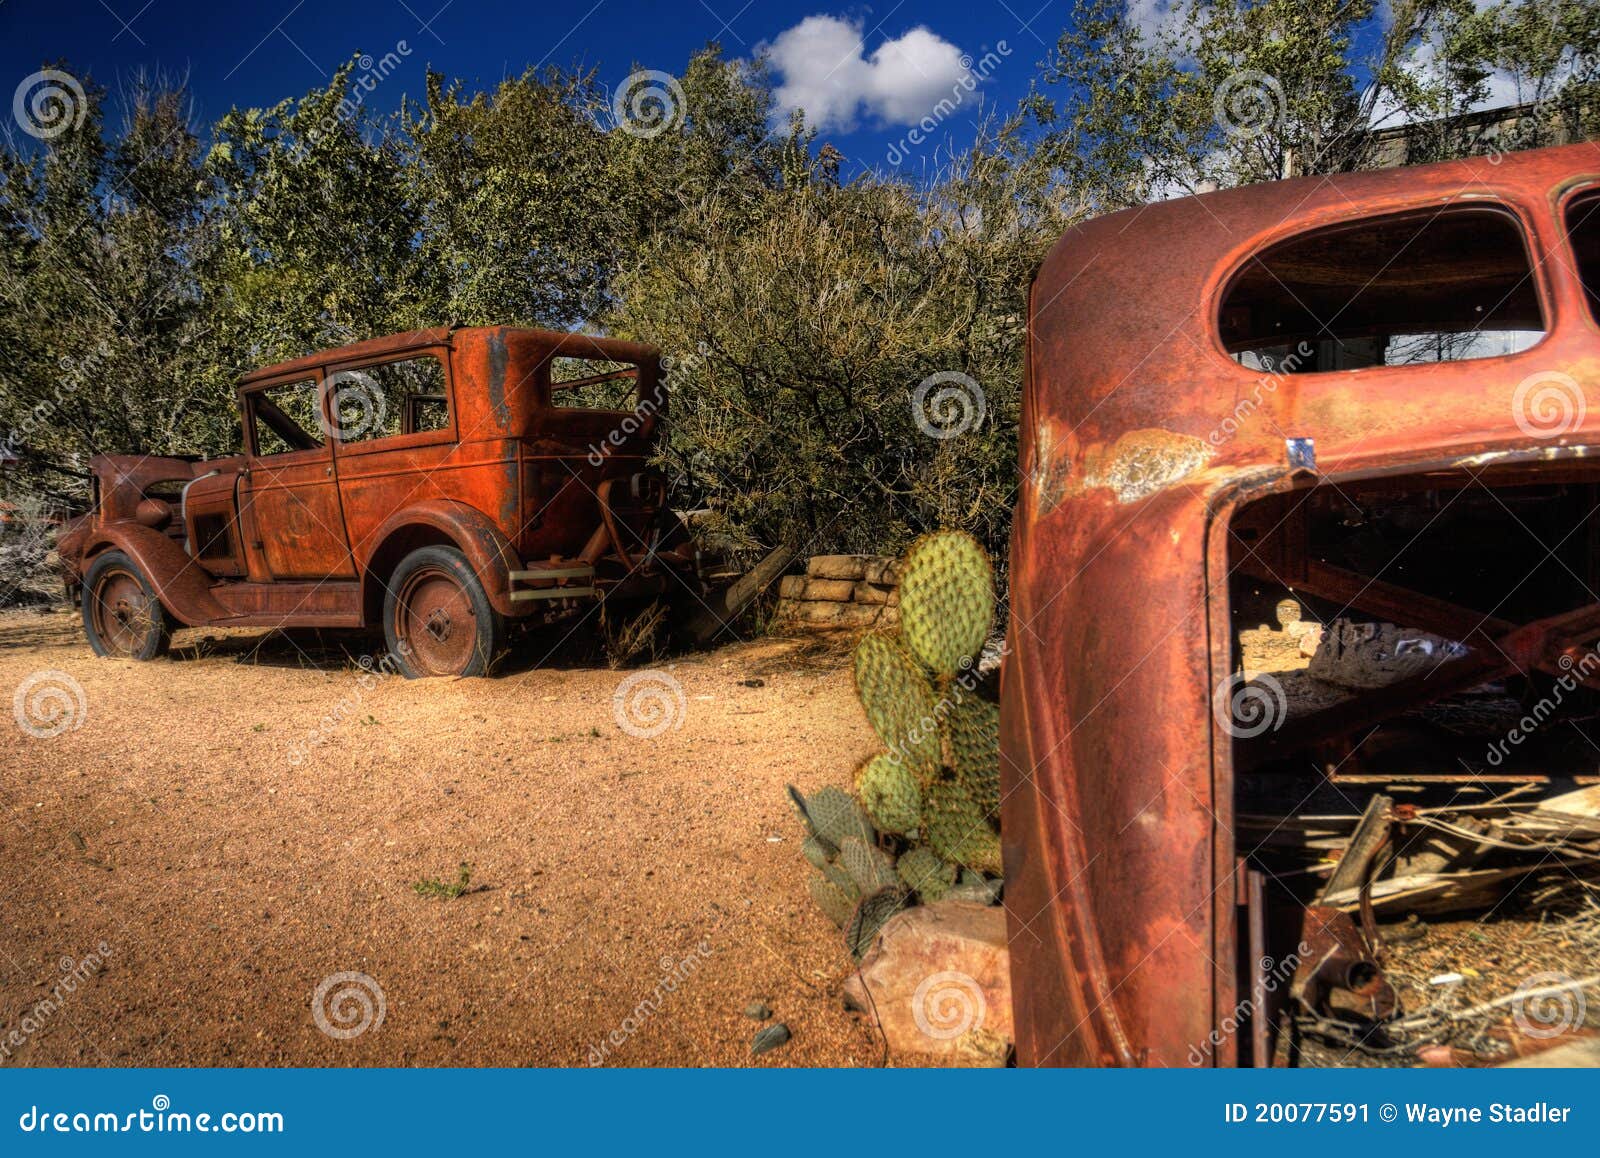 Two Old Classics Stock Image Image Of Desert Cactus 20077591